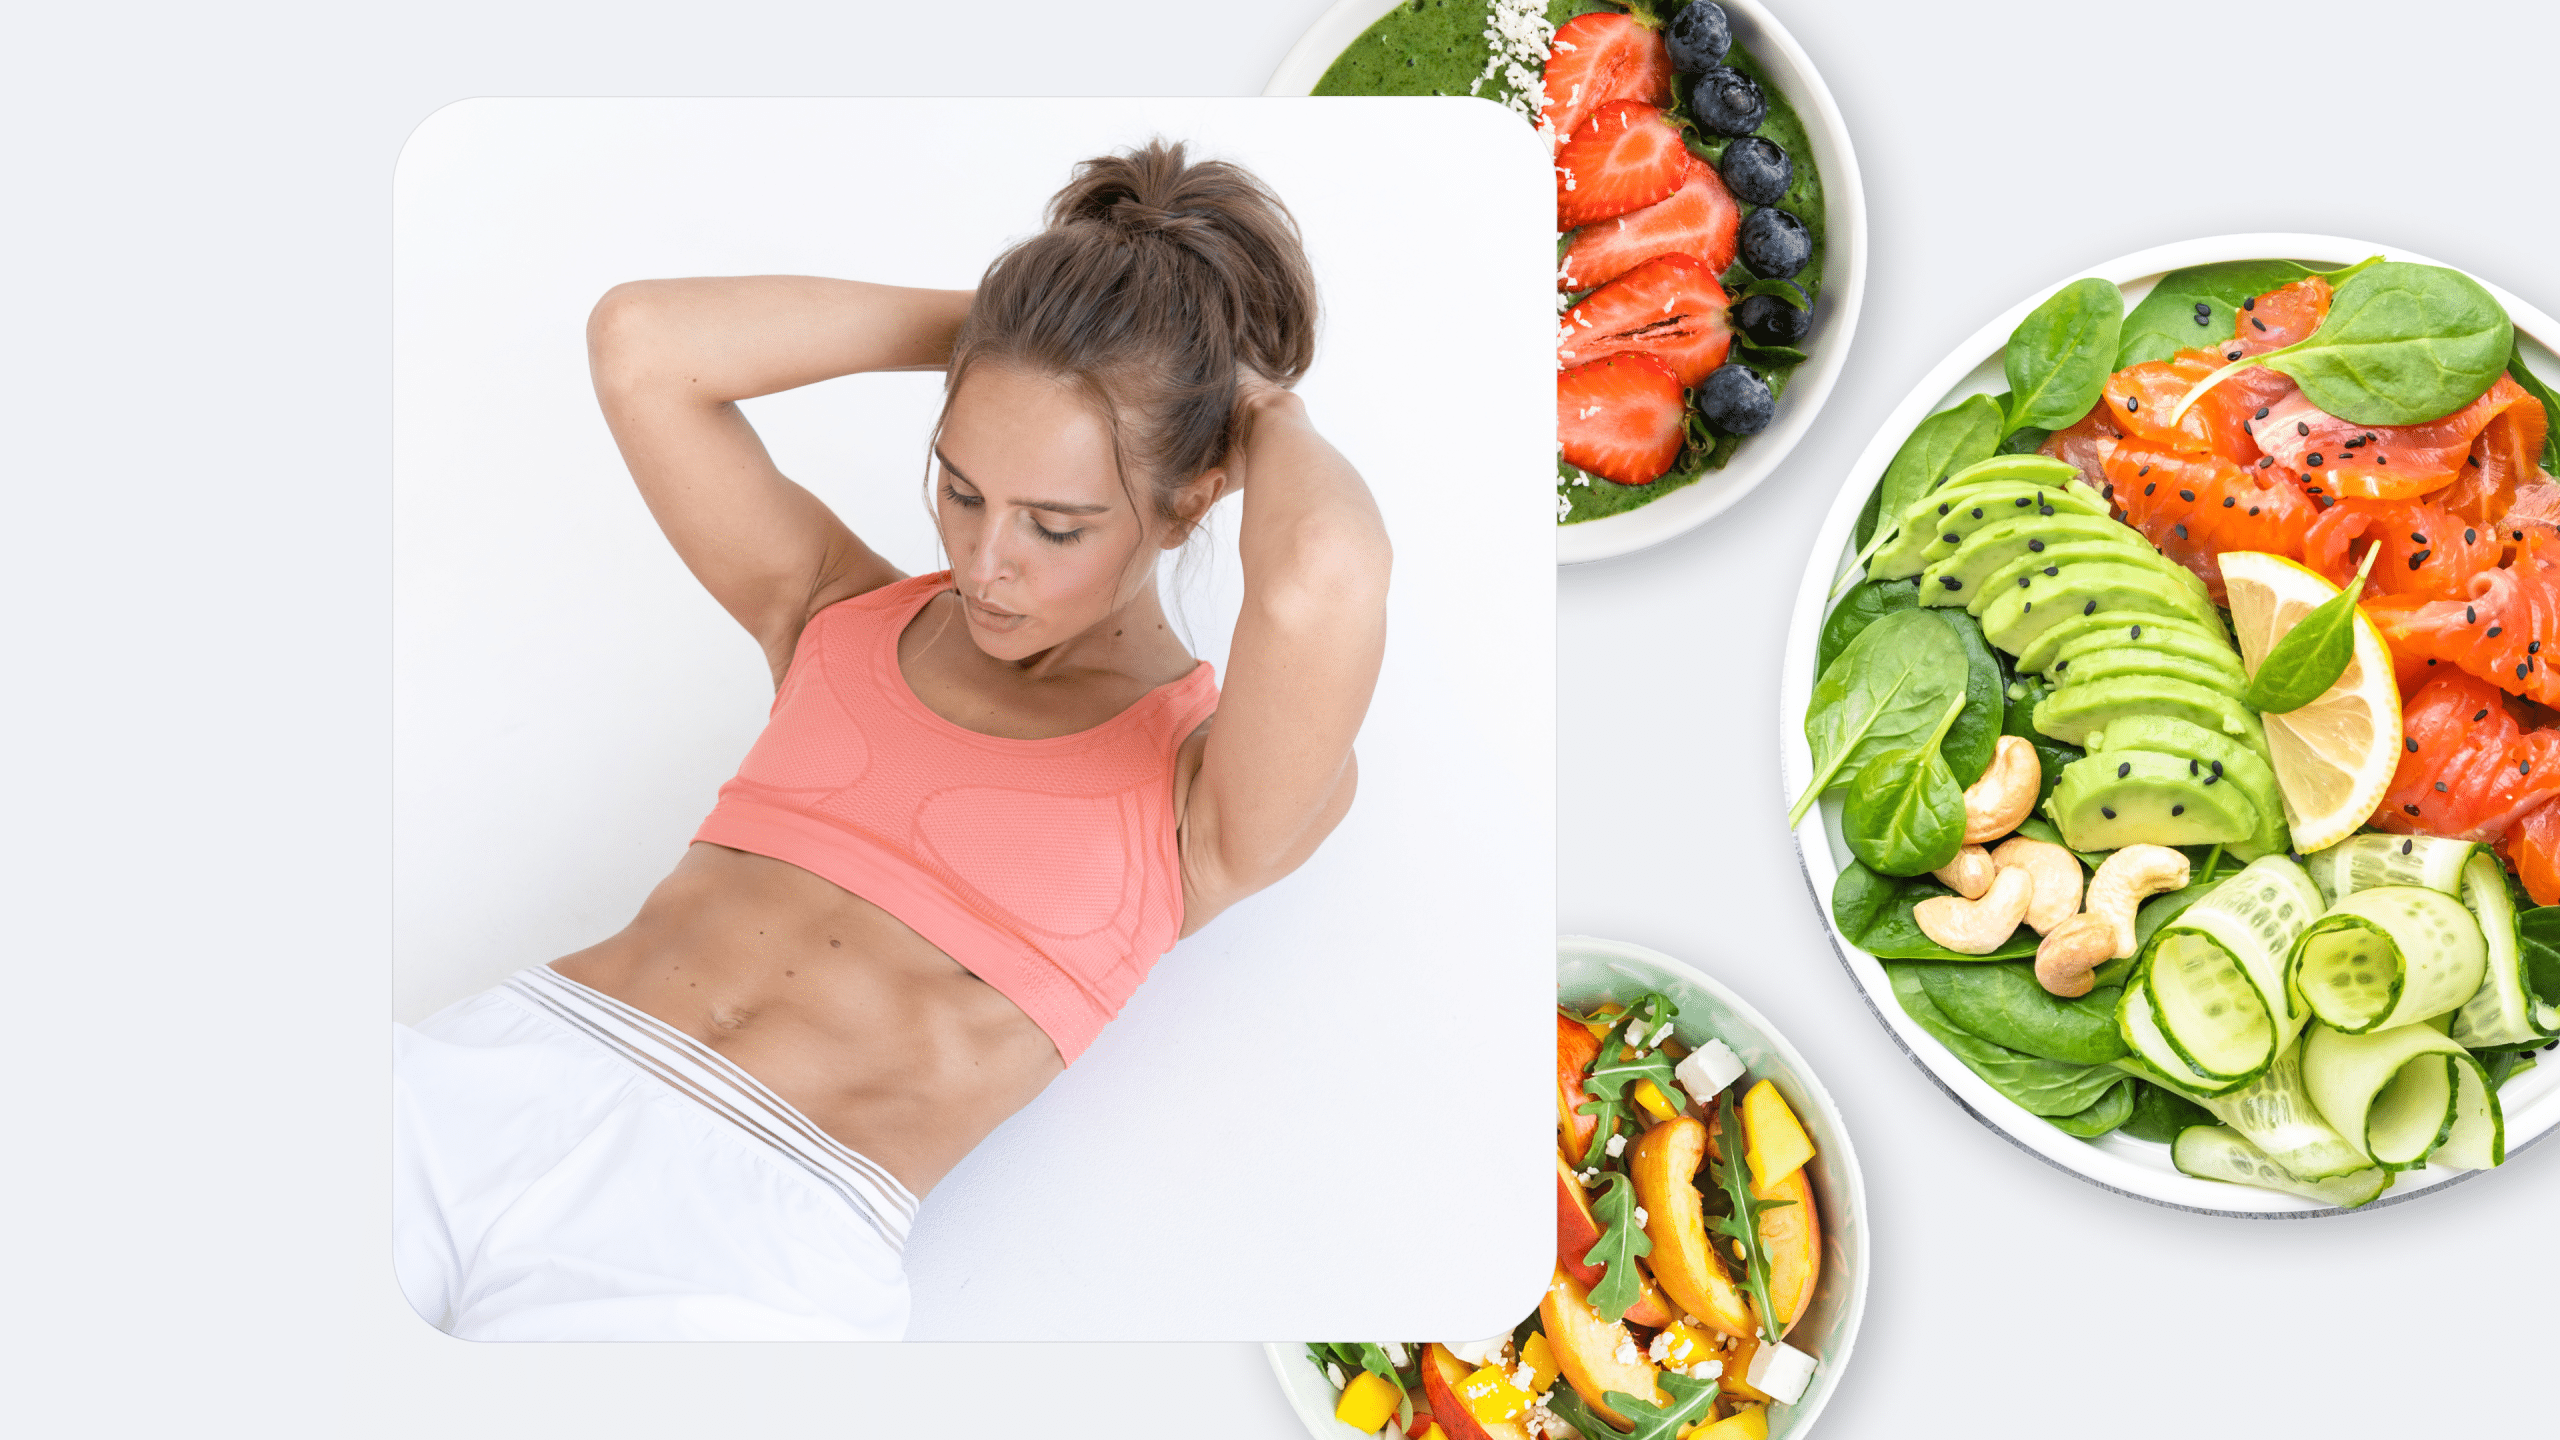 https://betterme.world/articles/wp-content/uploads/2021/03/2000-Calorie-Keto-Diet_-Low-Carb-High-Fat-Meals-Thatll-Make-Weight-Loss-A-Breeze.png